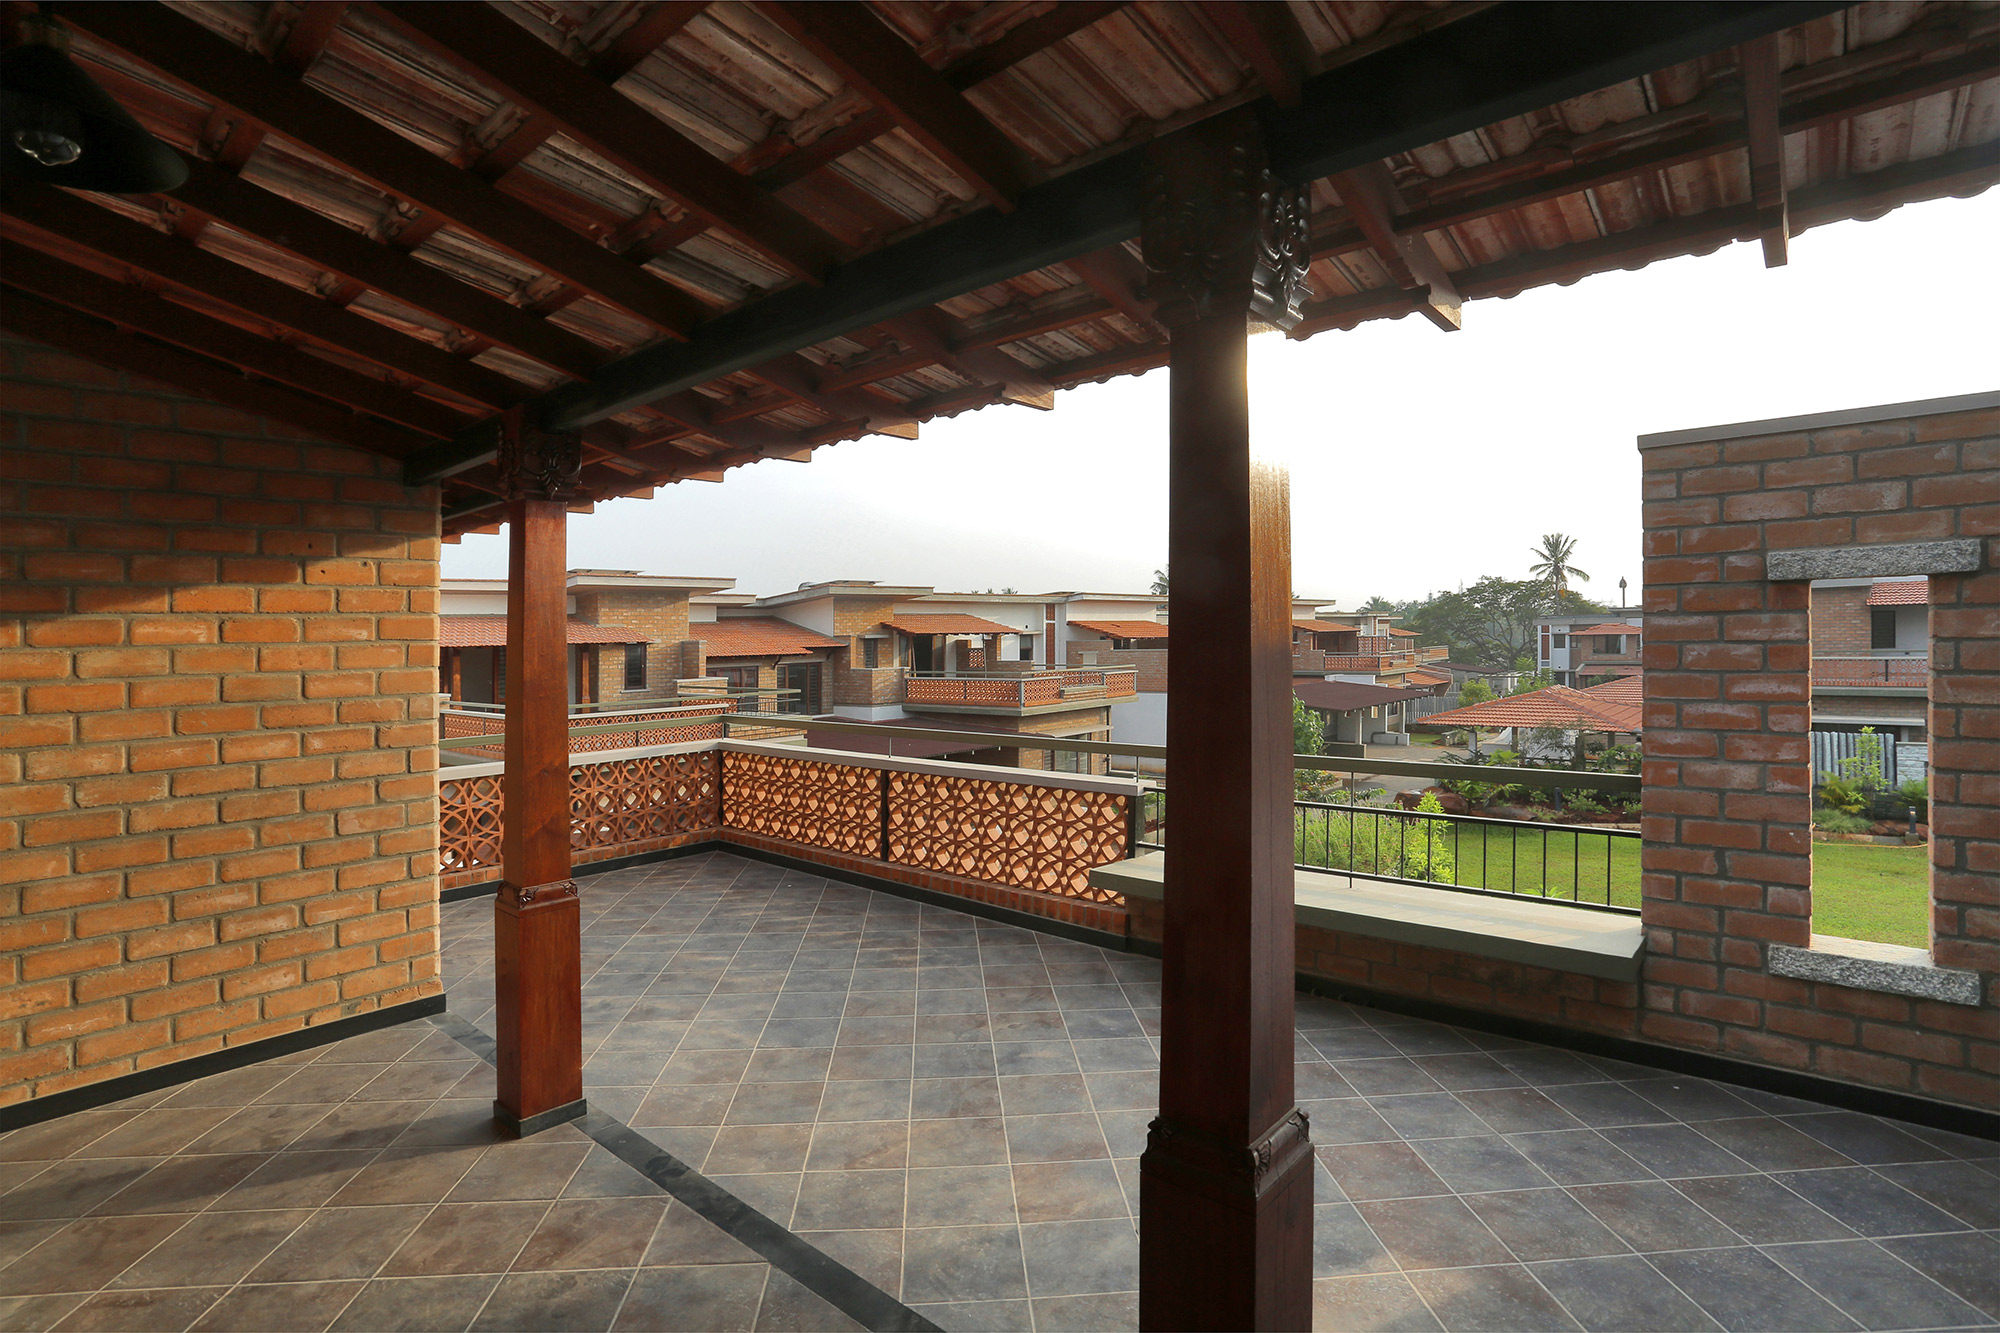 The terrace on the first floor with an interesting parapet wall, to enable better use of the space